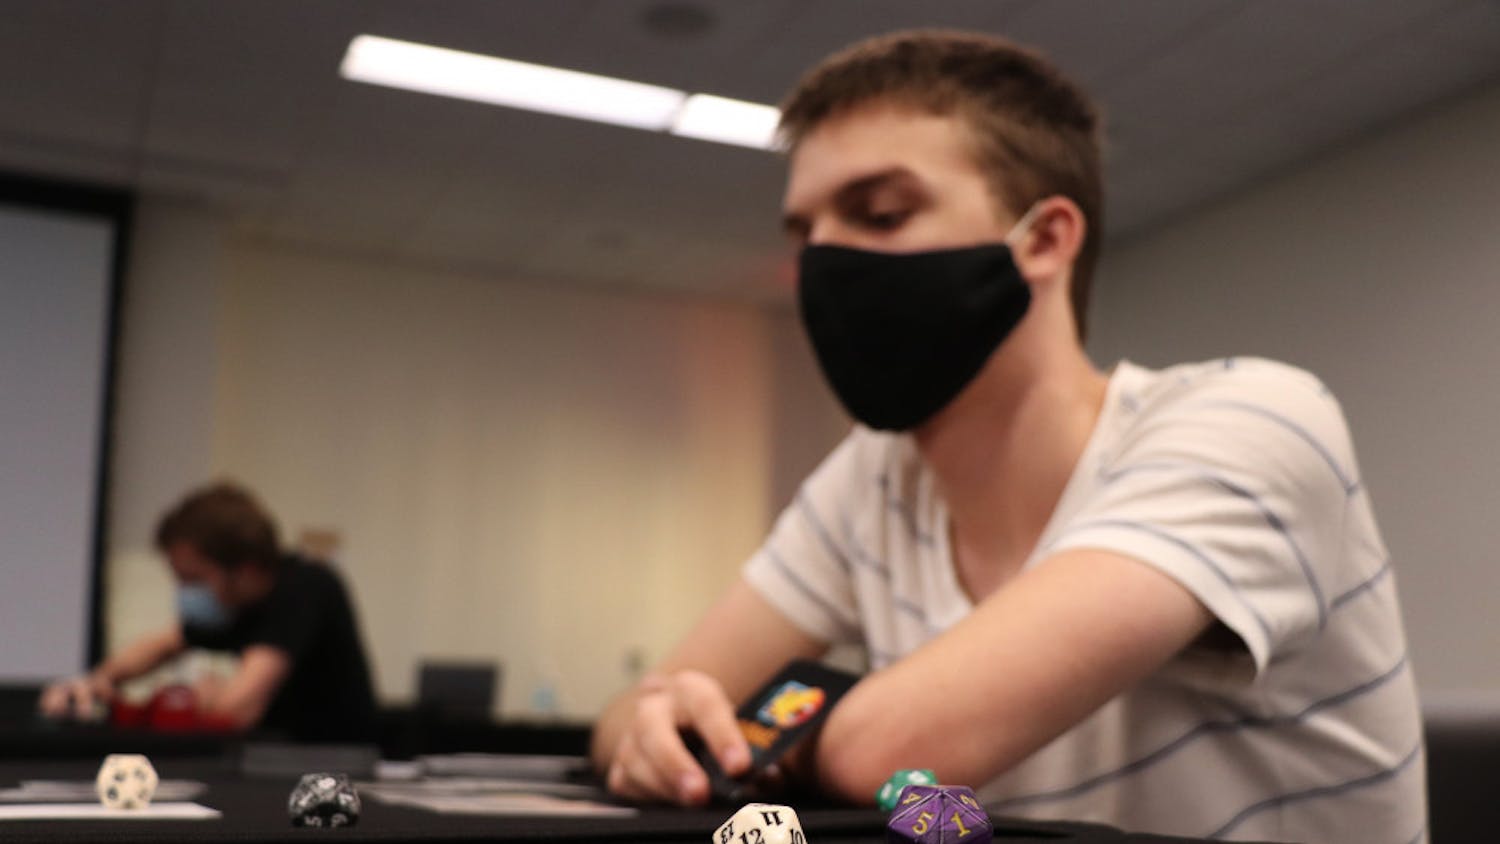 Ryan Feldbush, 19, a UF computer science sophomore, is seen playing ‘Magic: The Gathering’ at the Reitz Student Union on Wednesday, Sept. 30, 2020. Feldbush said he’s played the game for six years now. 